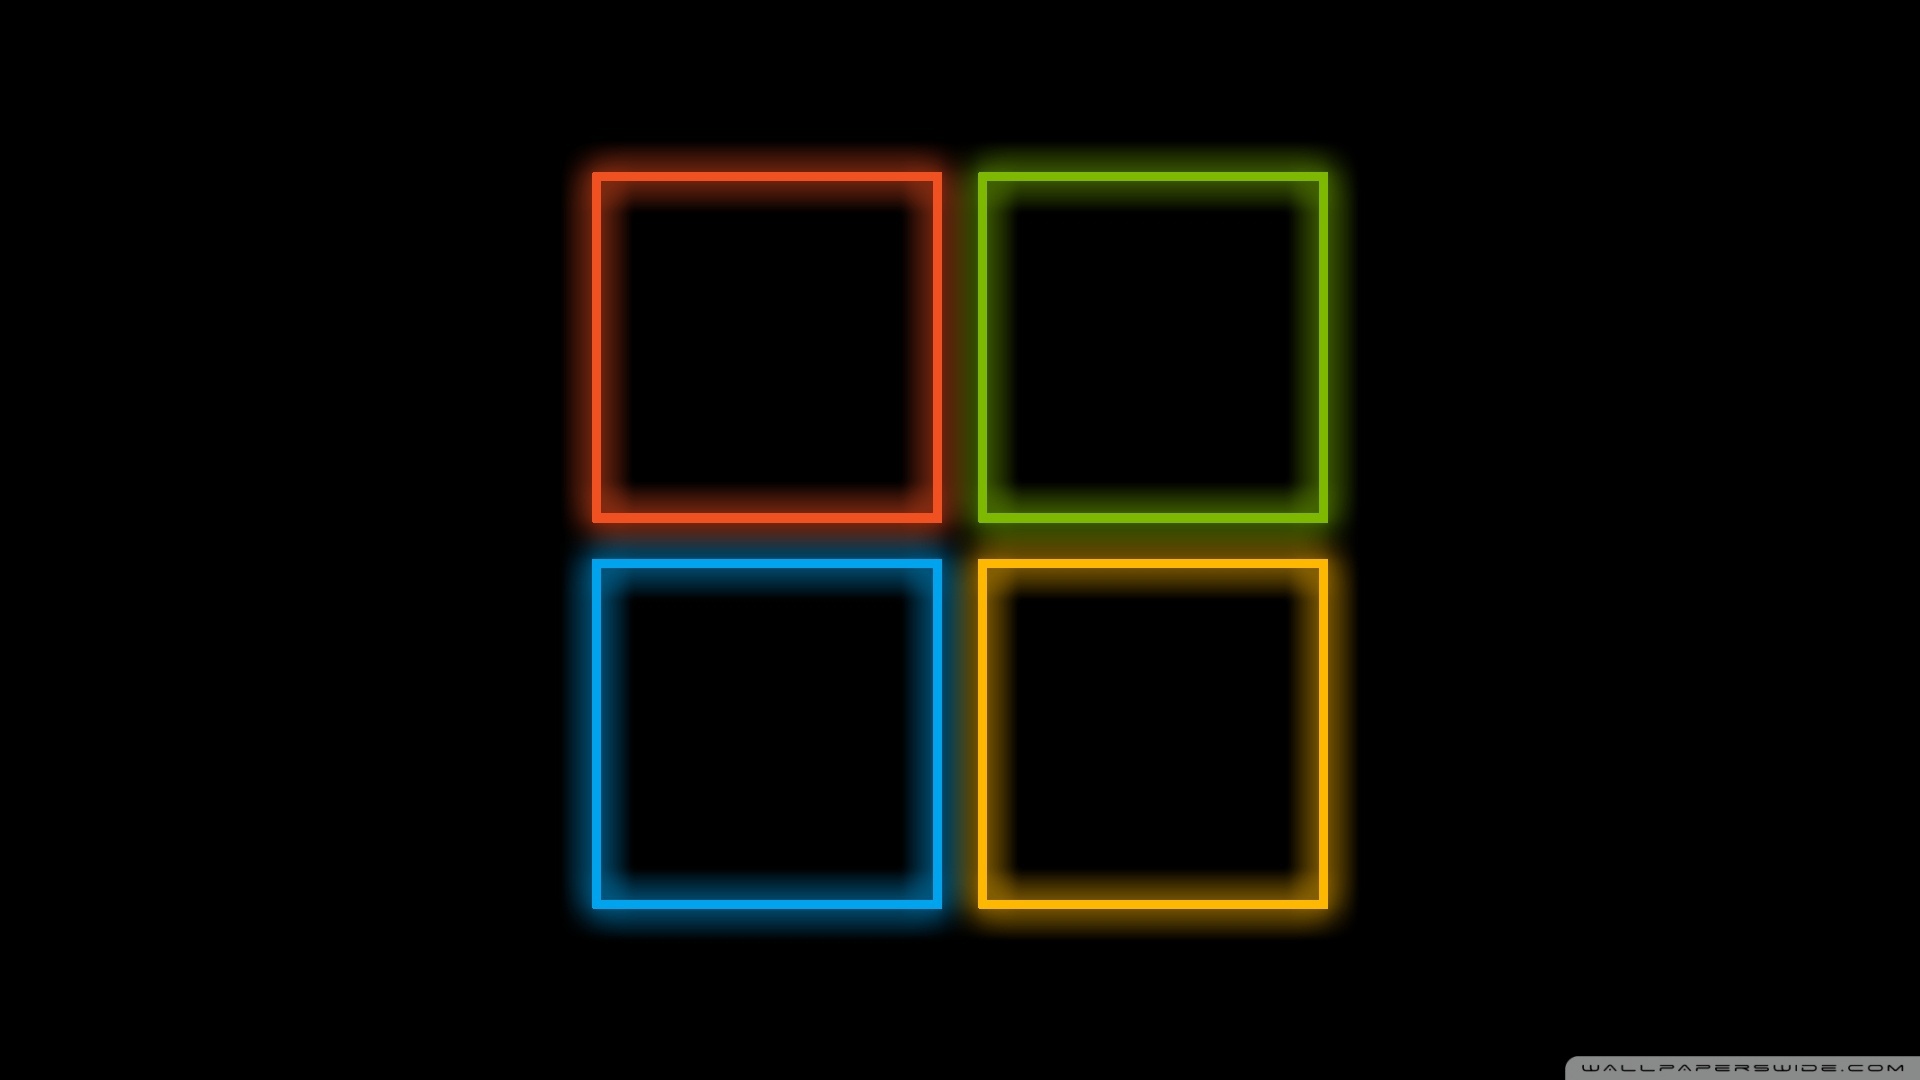 Windows 8 neon logo wallpapers and images   wallpapers pictures